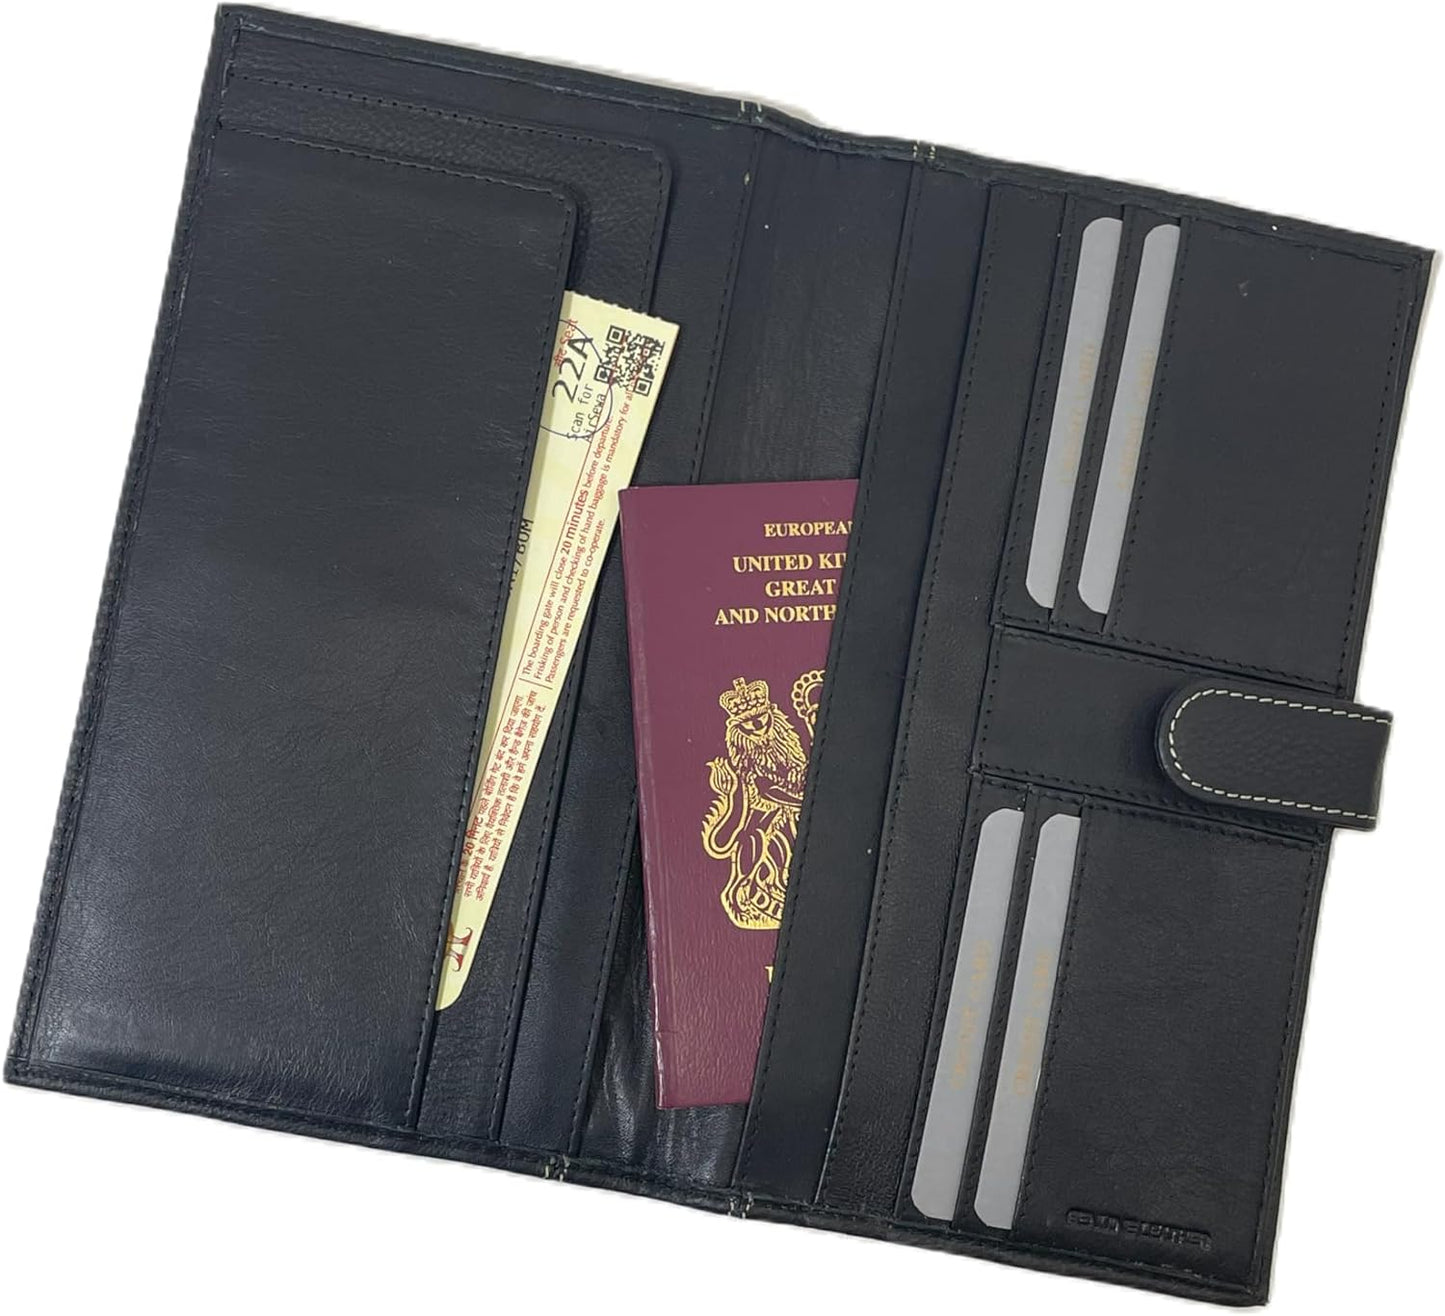 Pratico - leather travel wallet with Tab #TW01 Black